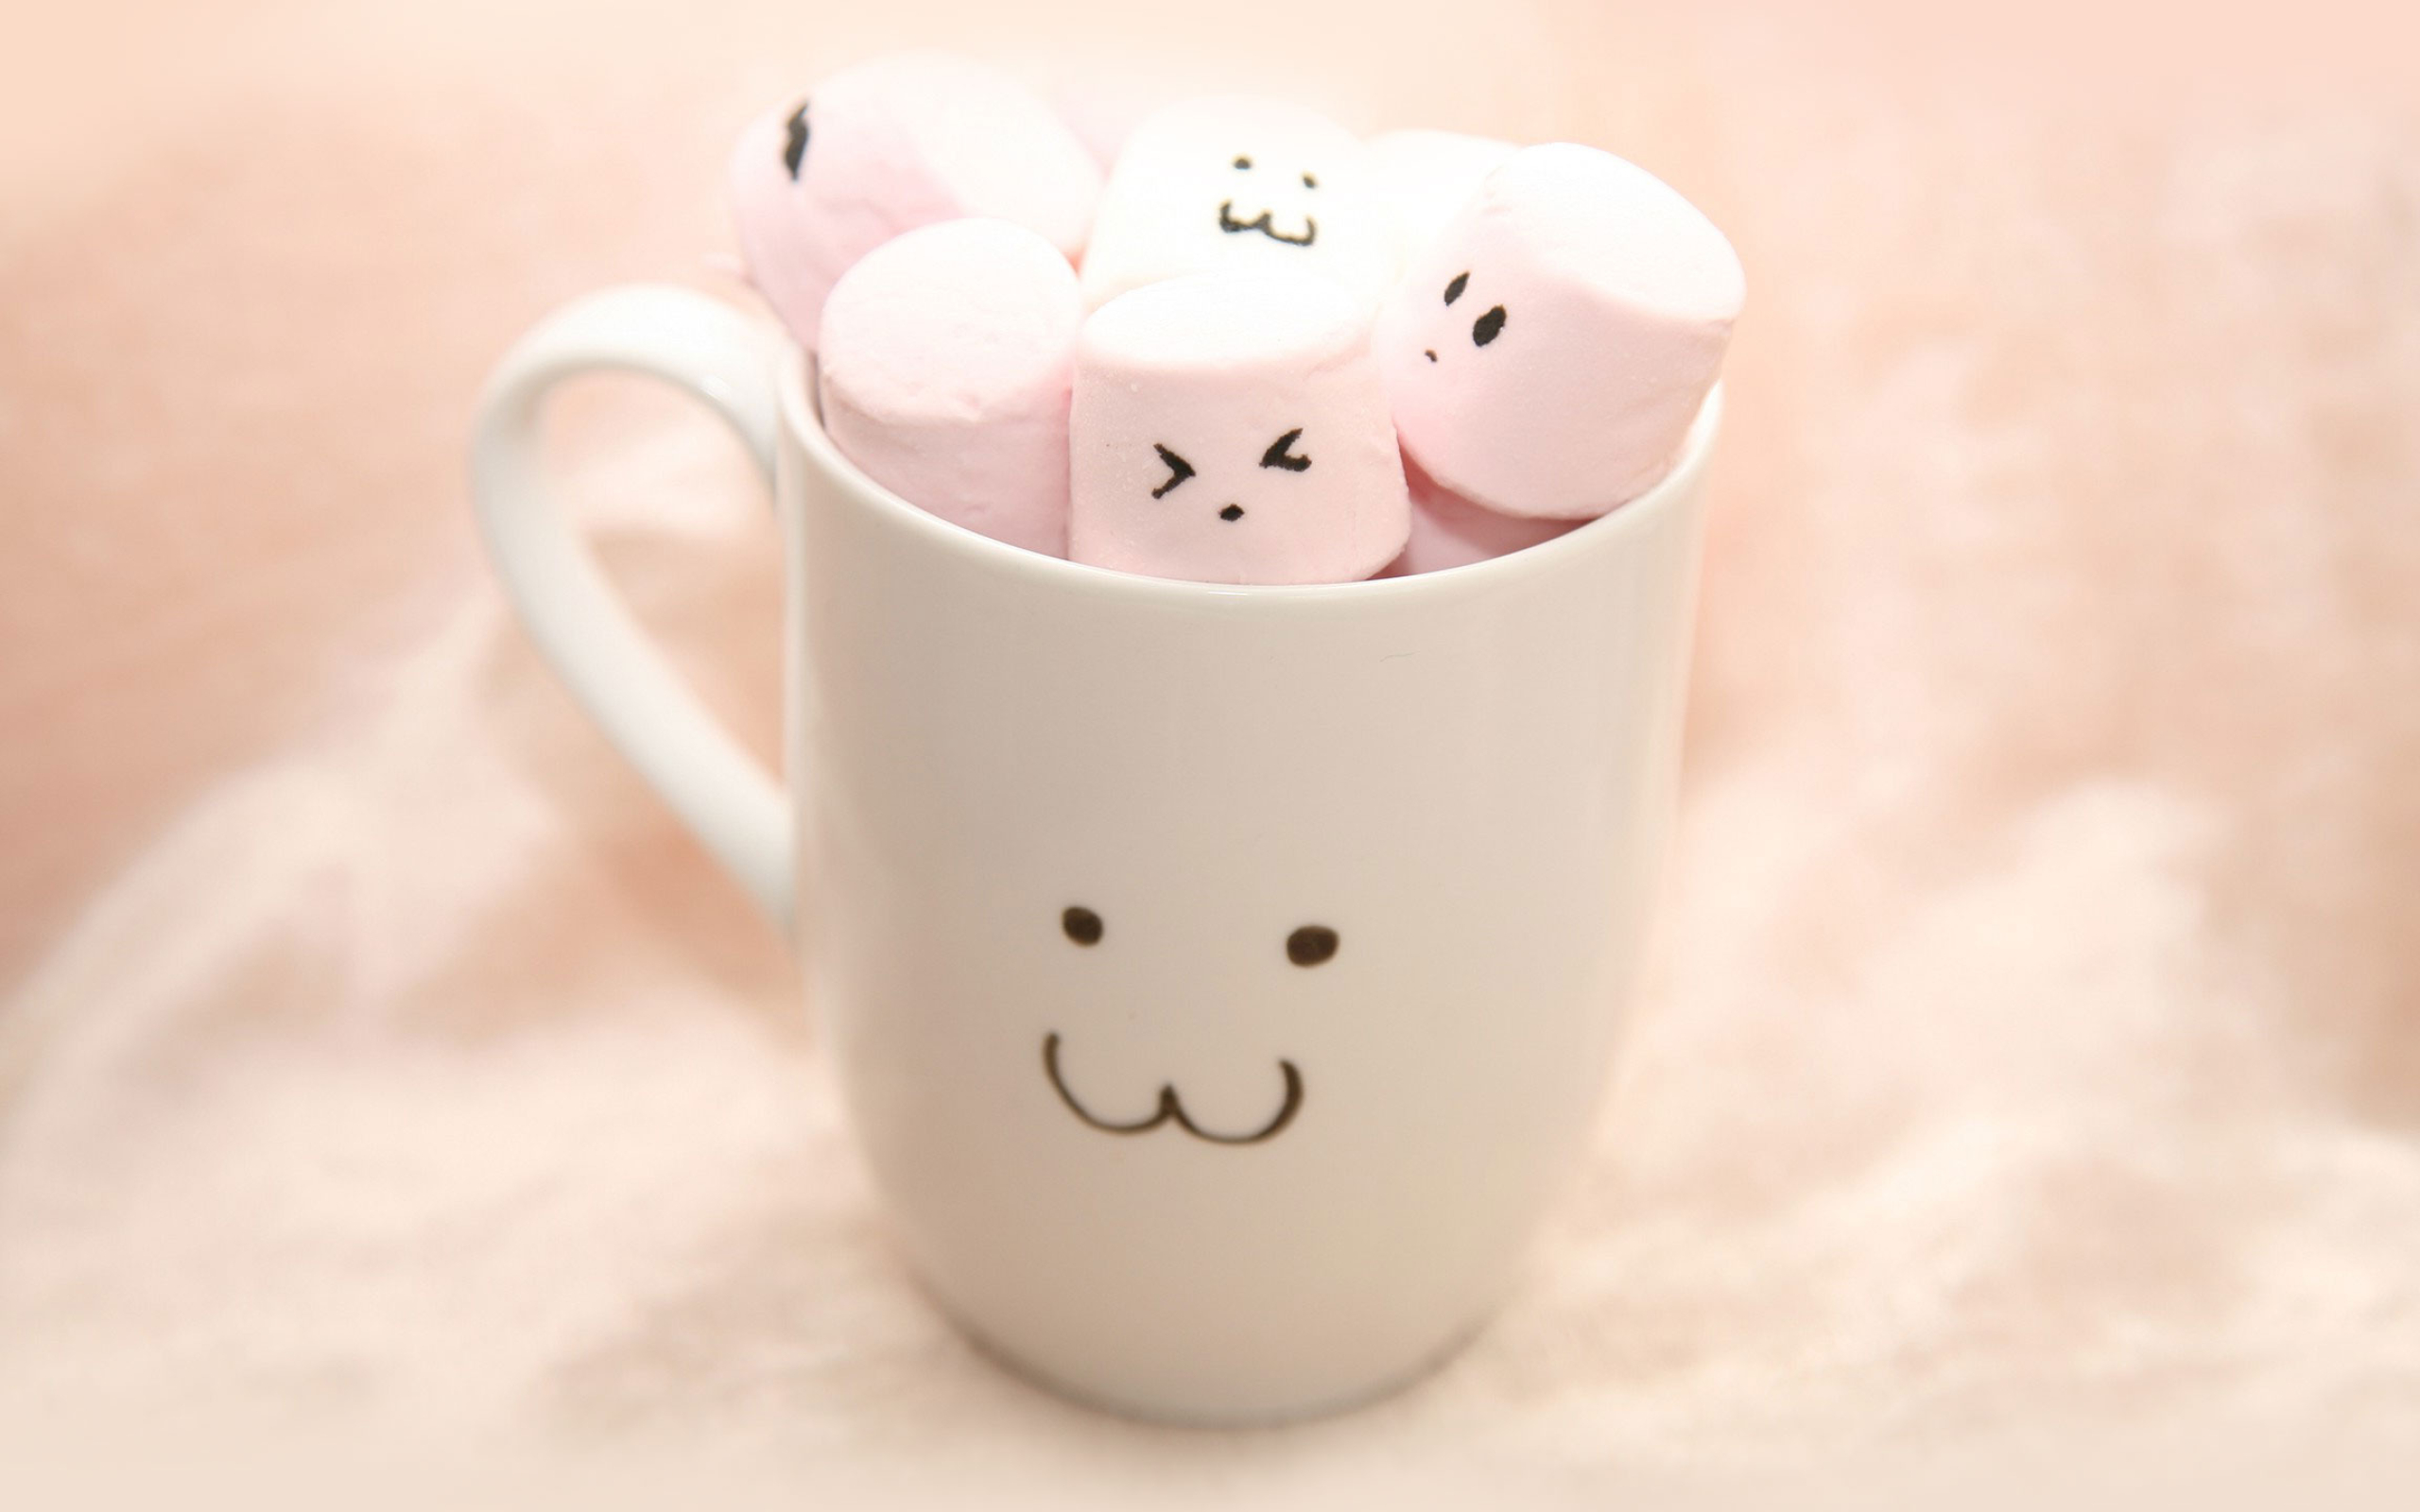 Marshmallow: A spongy confectionery, Cup full of marshmallows. 2560x1600 HD Wallpaper.